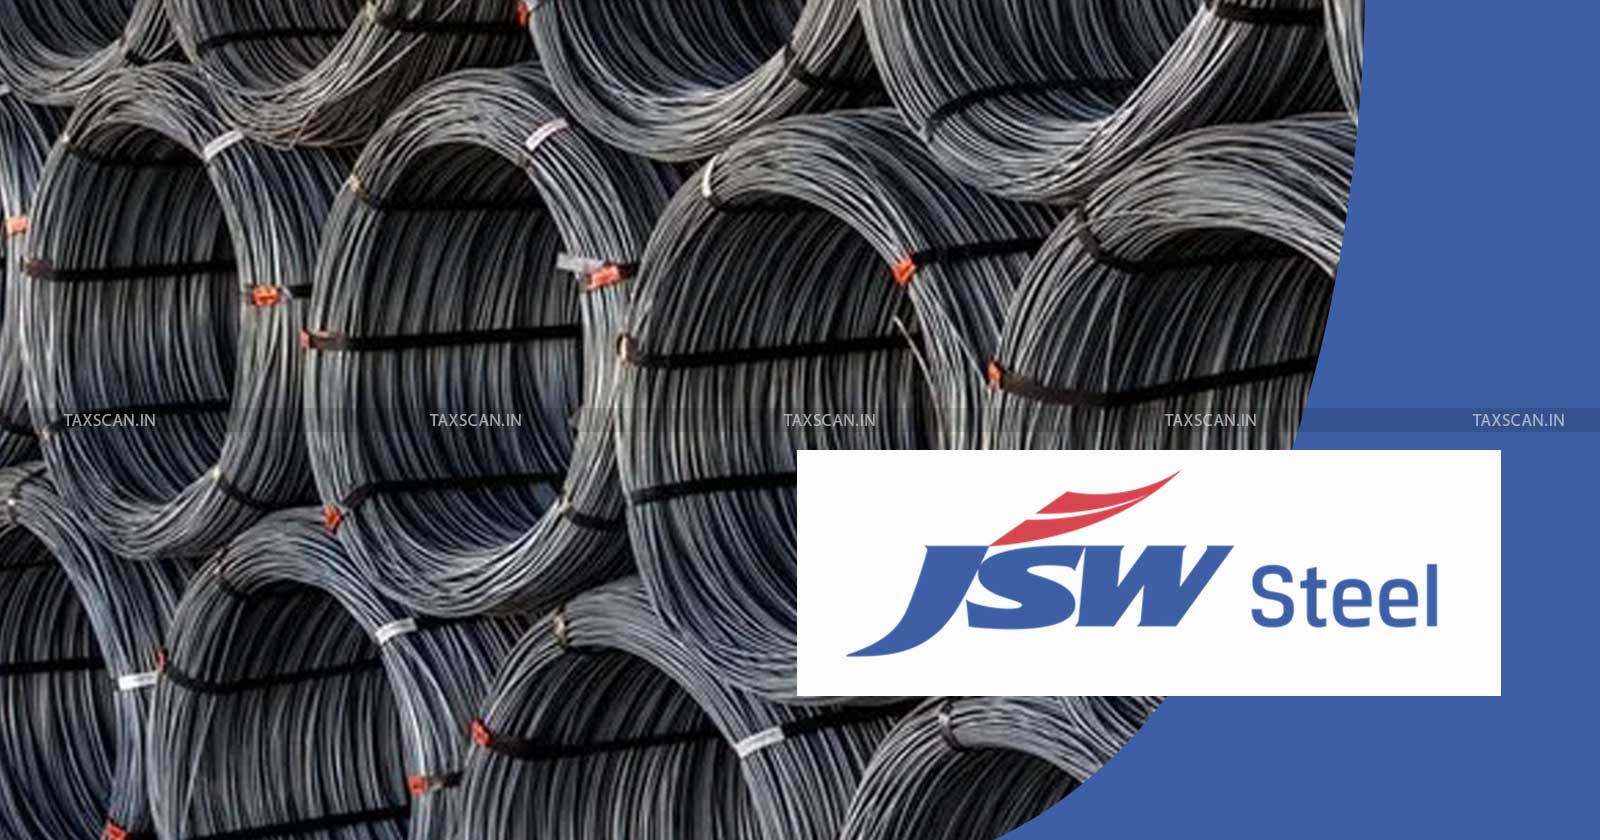 Relief to JSW Steel - CESTAT Quashes Disallowance of CENVAT Credit - Service Tax on input services on ground - Non-violation of rule 2(l) - CESTAT - Service Tax - EXCISE & CUSTOMS - Disallowance of CENVAT Credit - TAXSCAN